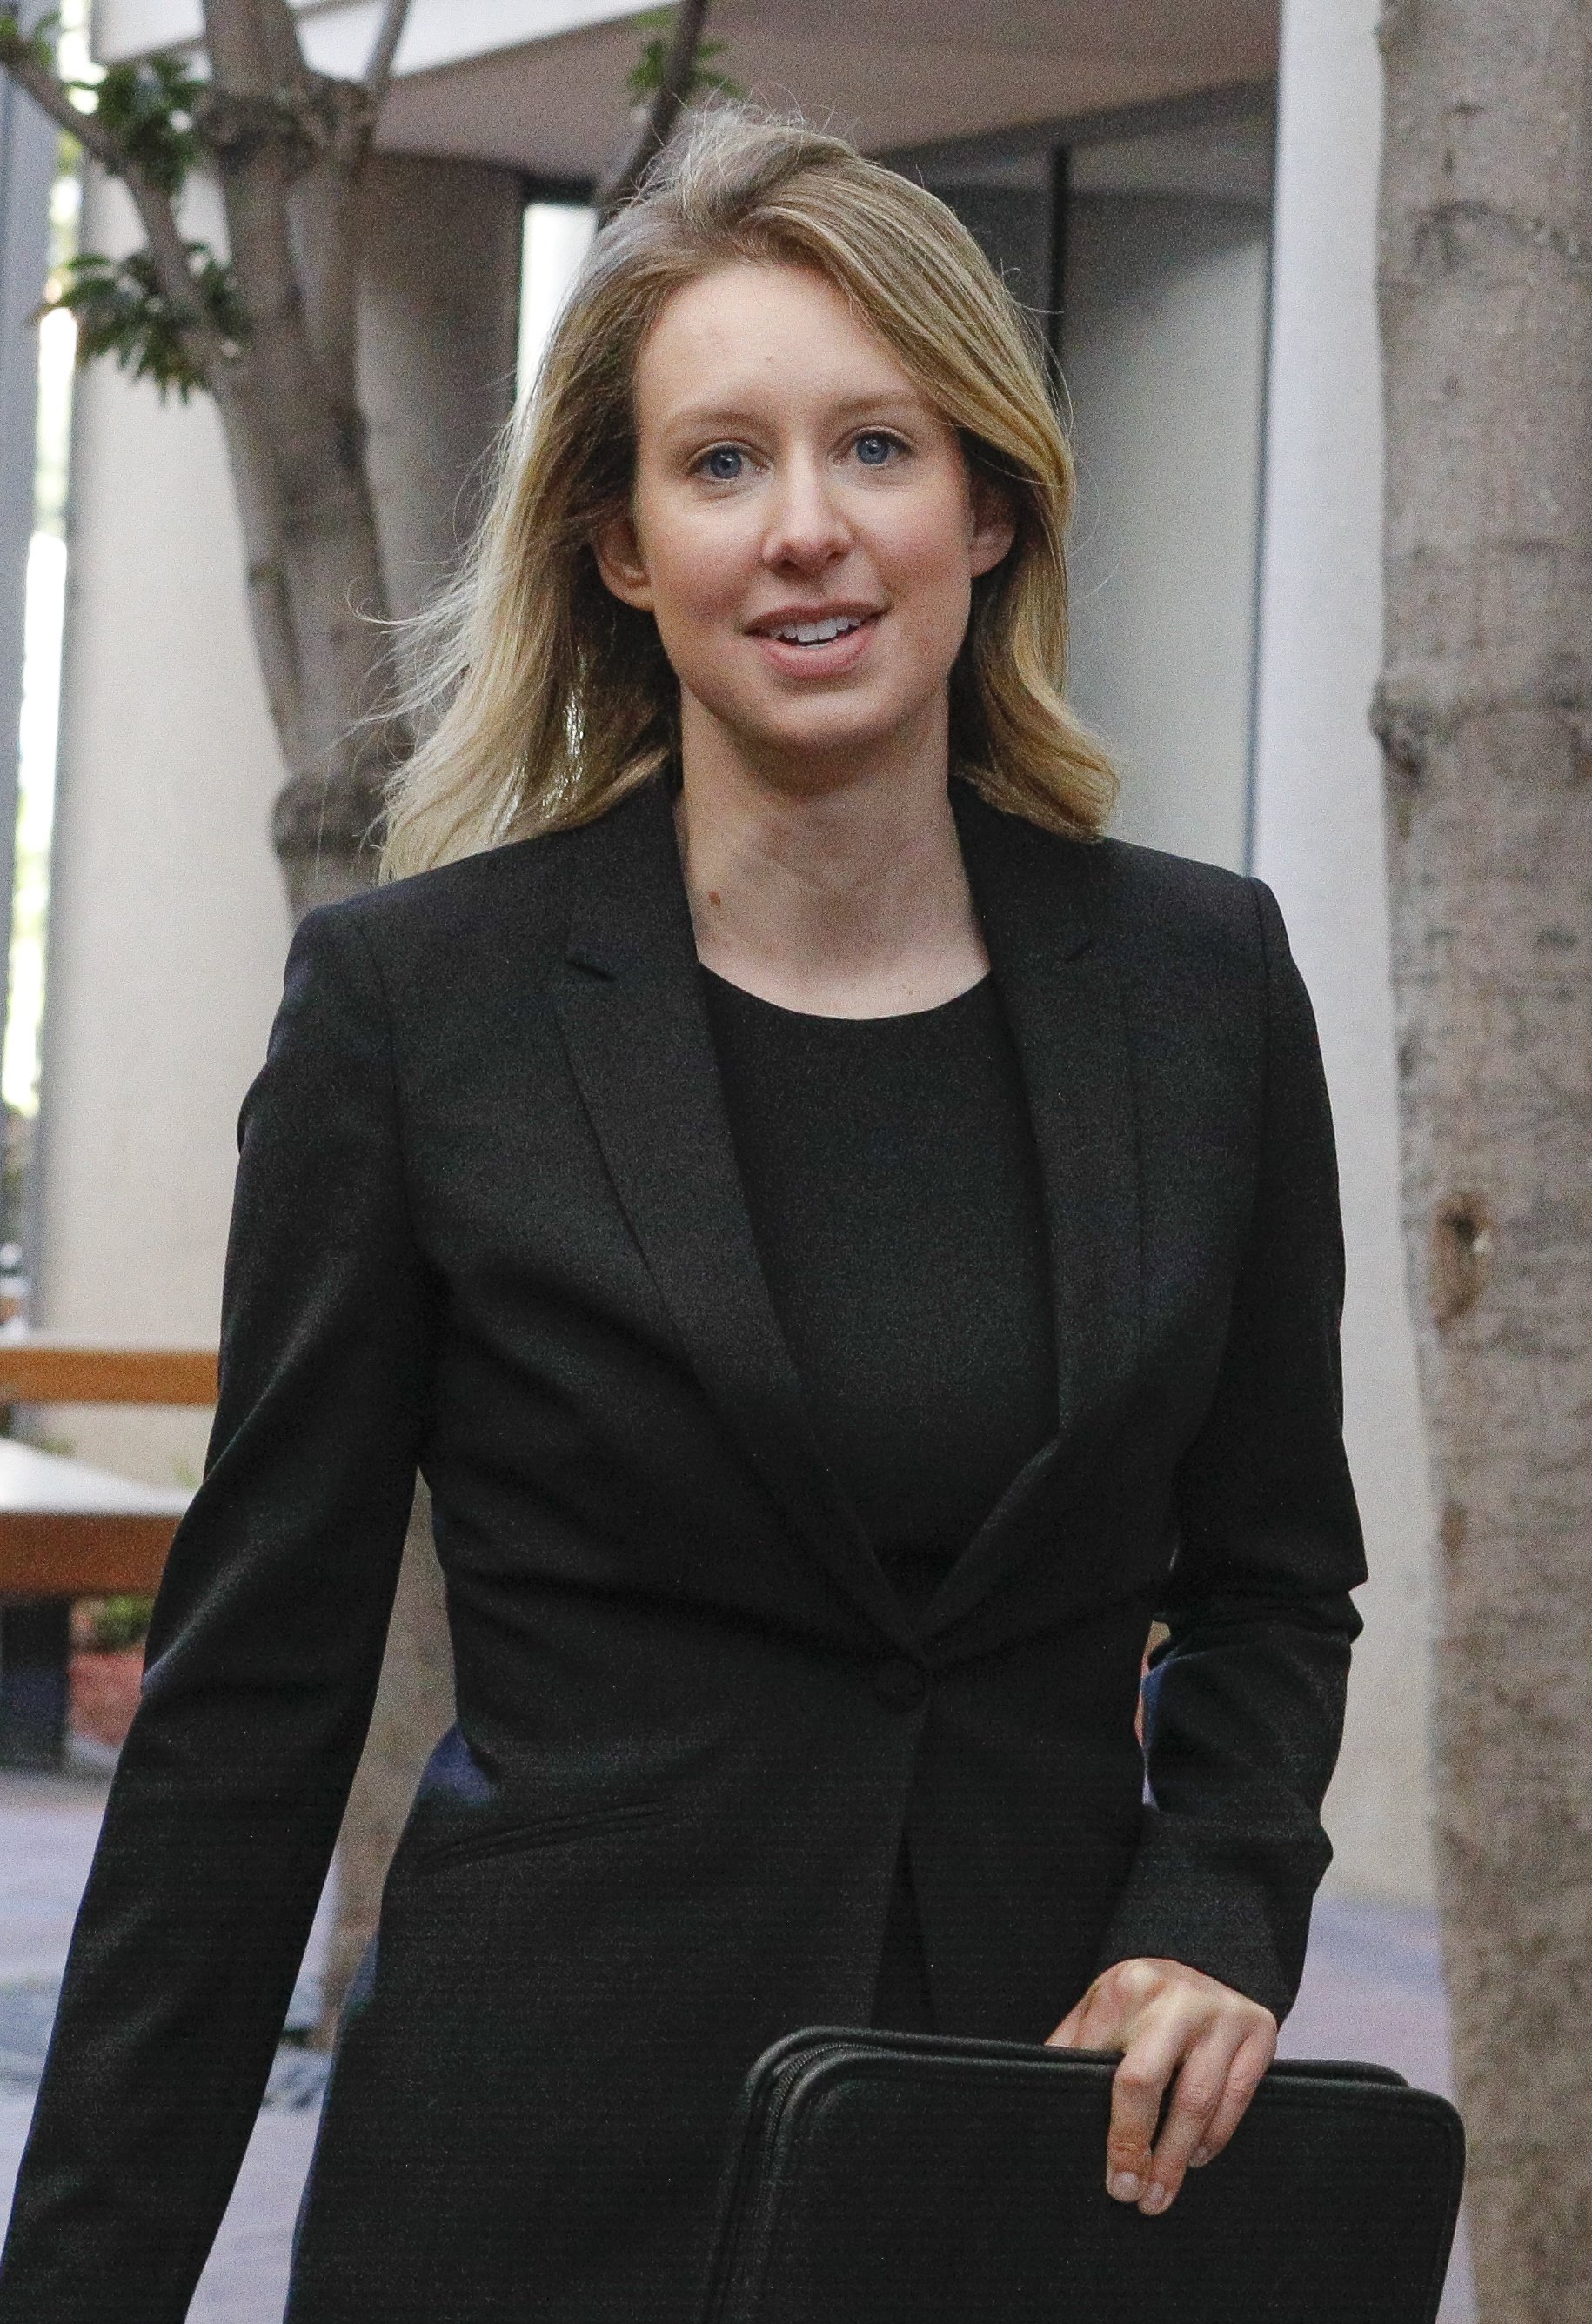 Elizabeth Holmes on July 17, 2019 in San Jose, California. | Source: Getty Images